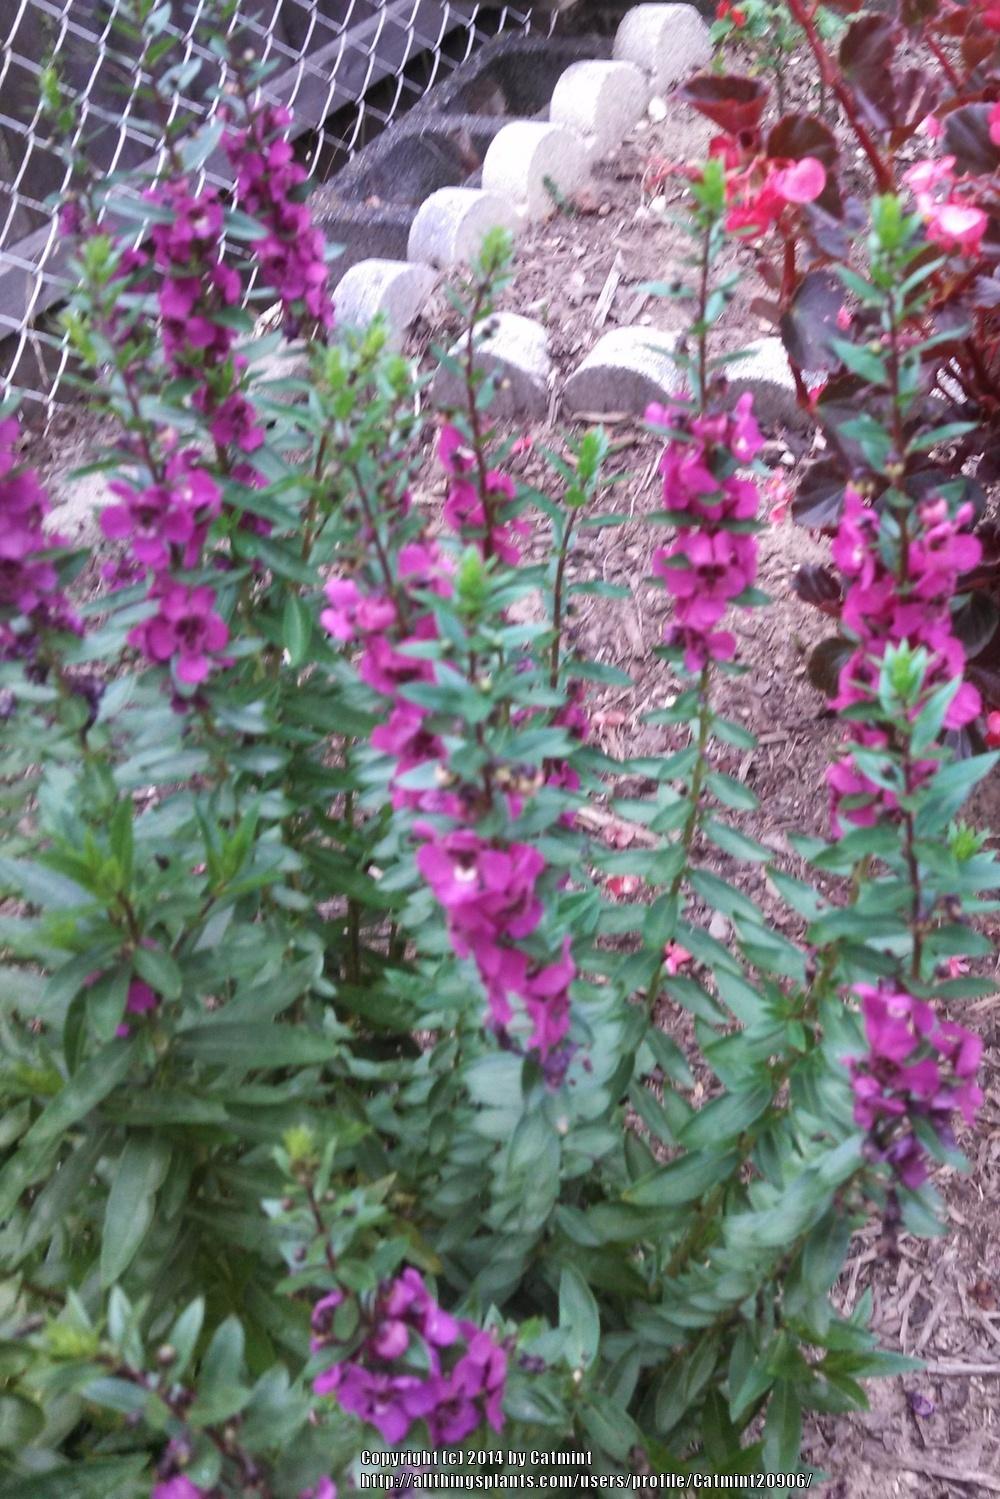 Photo of Angelonia (Angelonia angustifolia Archangel™ Raspberry Improved) uploaded by Catmint20906